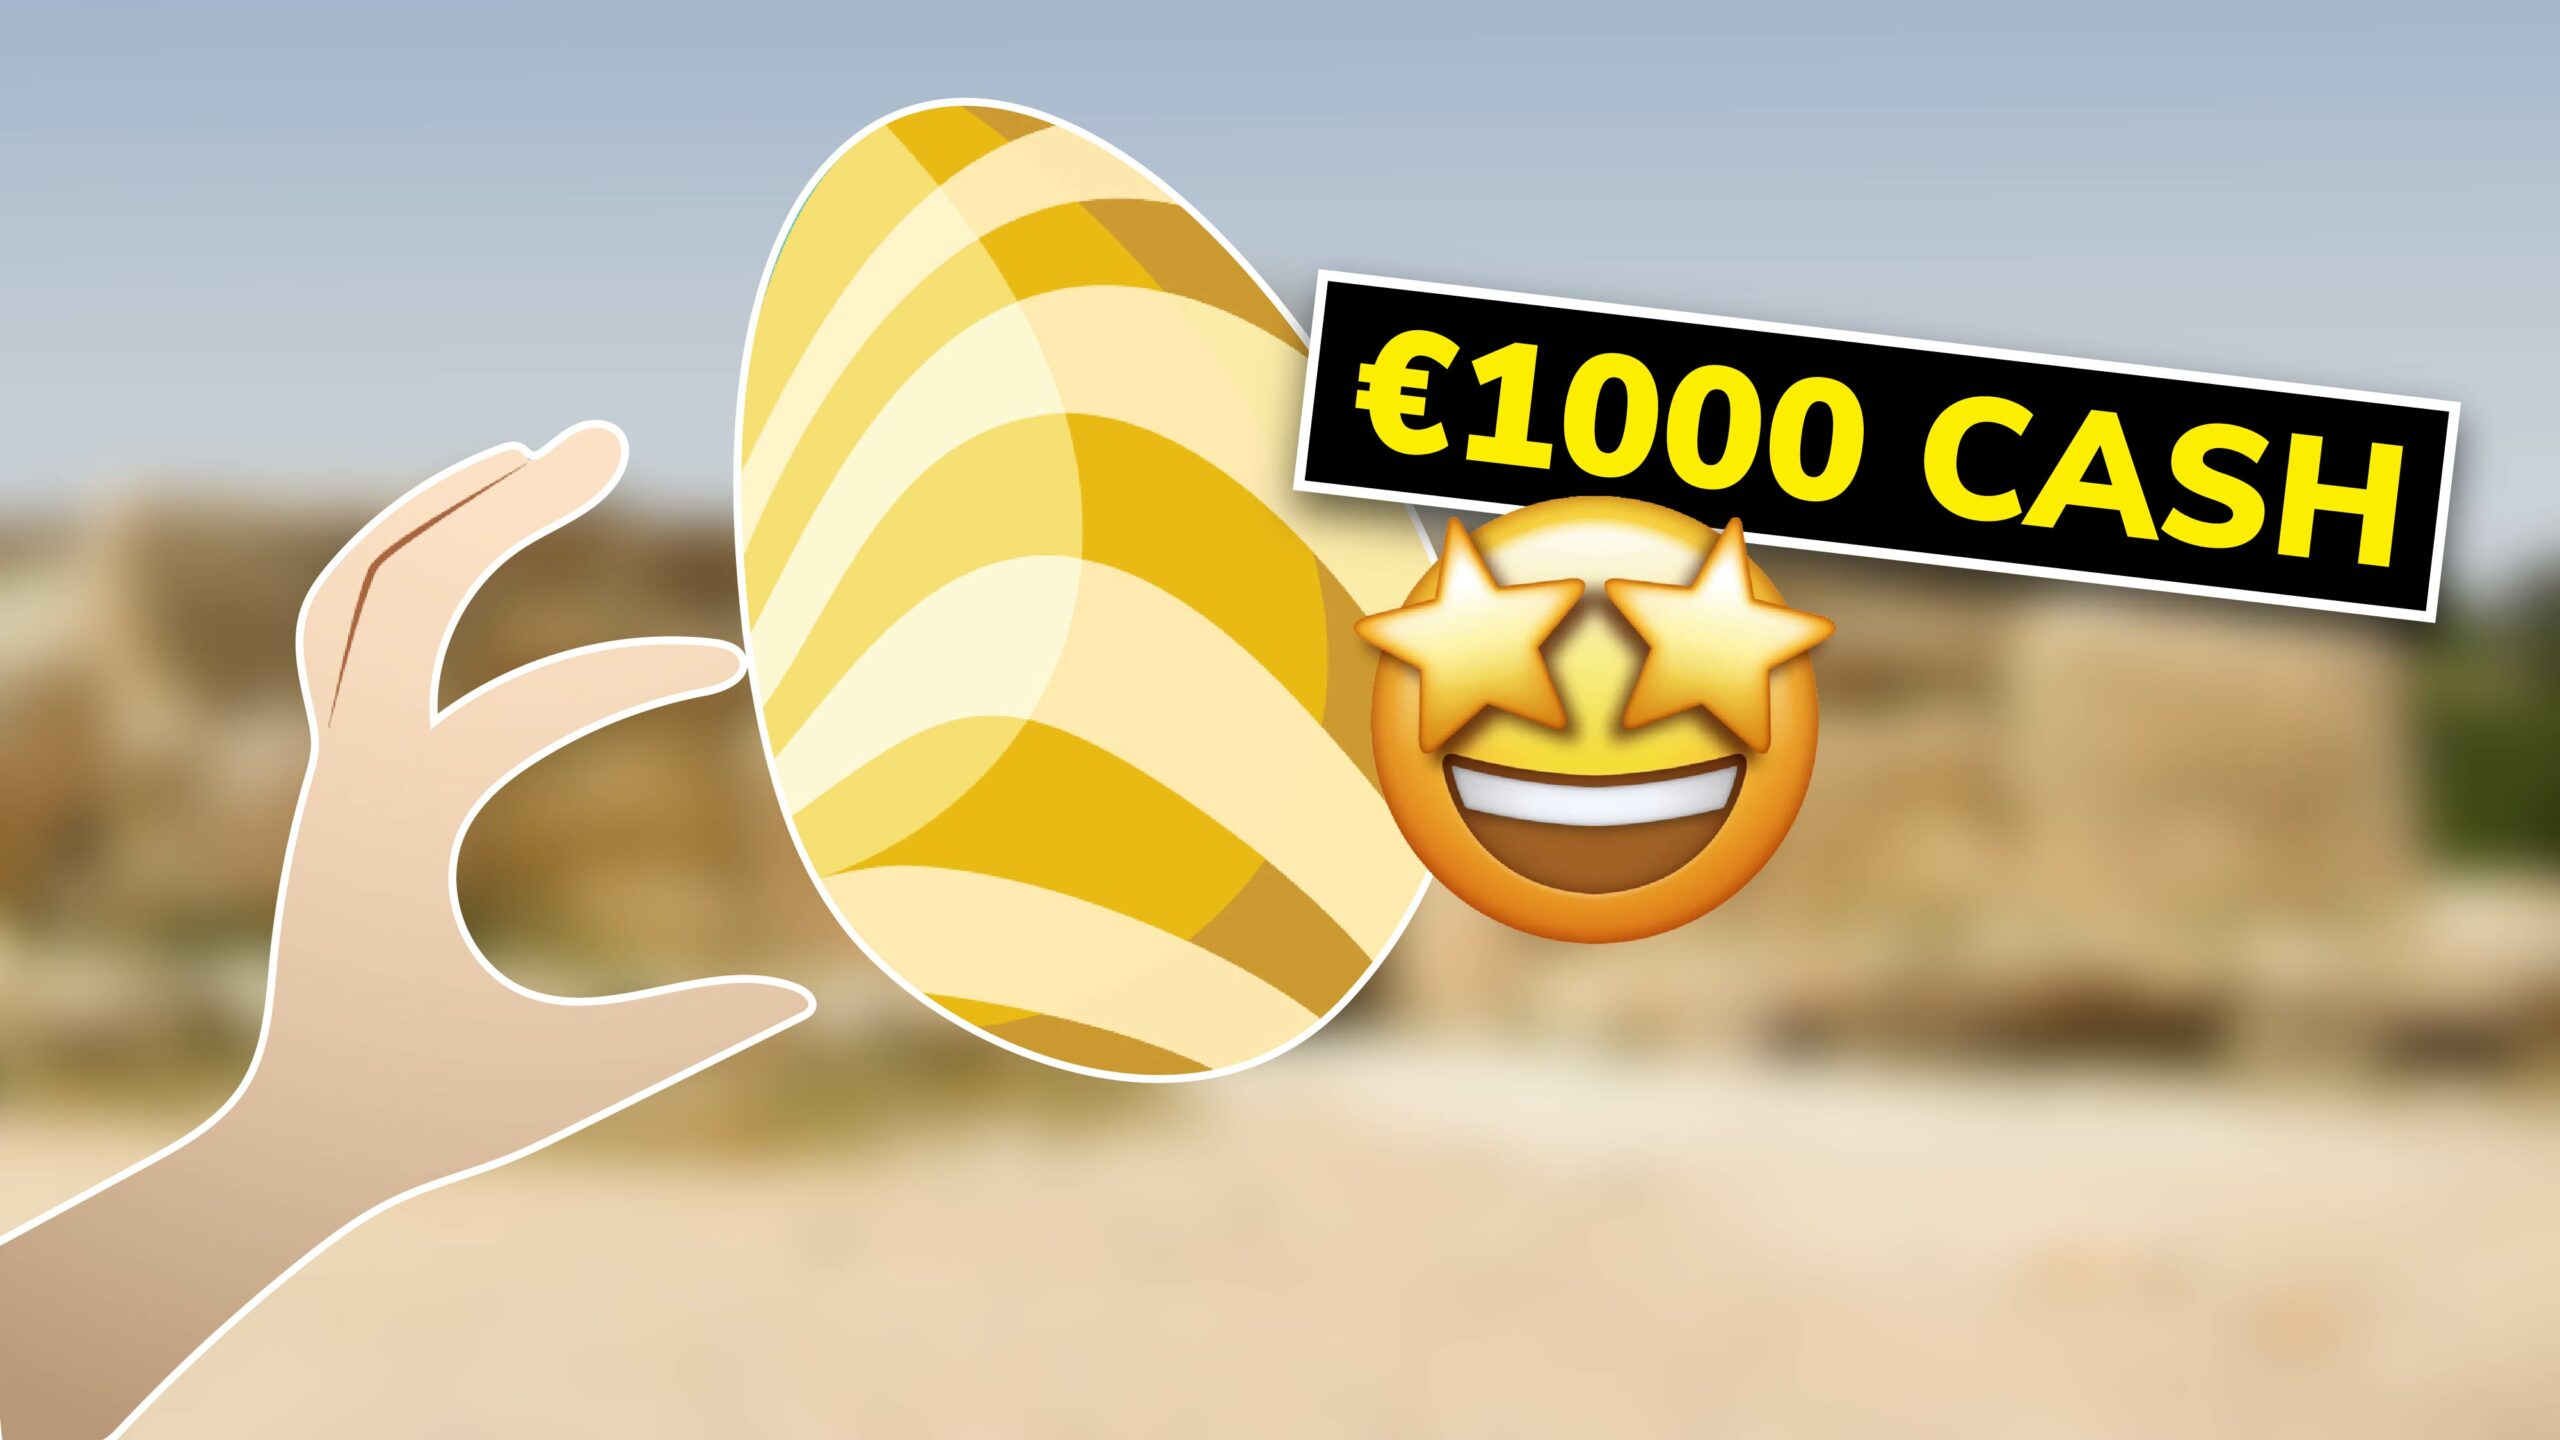 You could be a few a few weeks away from winning €1000 at The Malta National Hunt